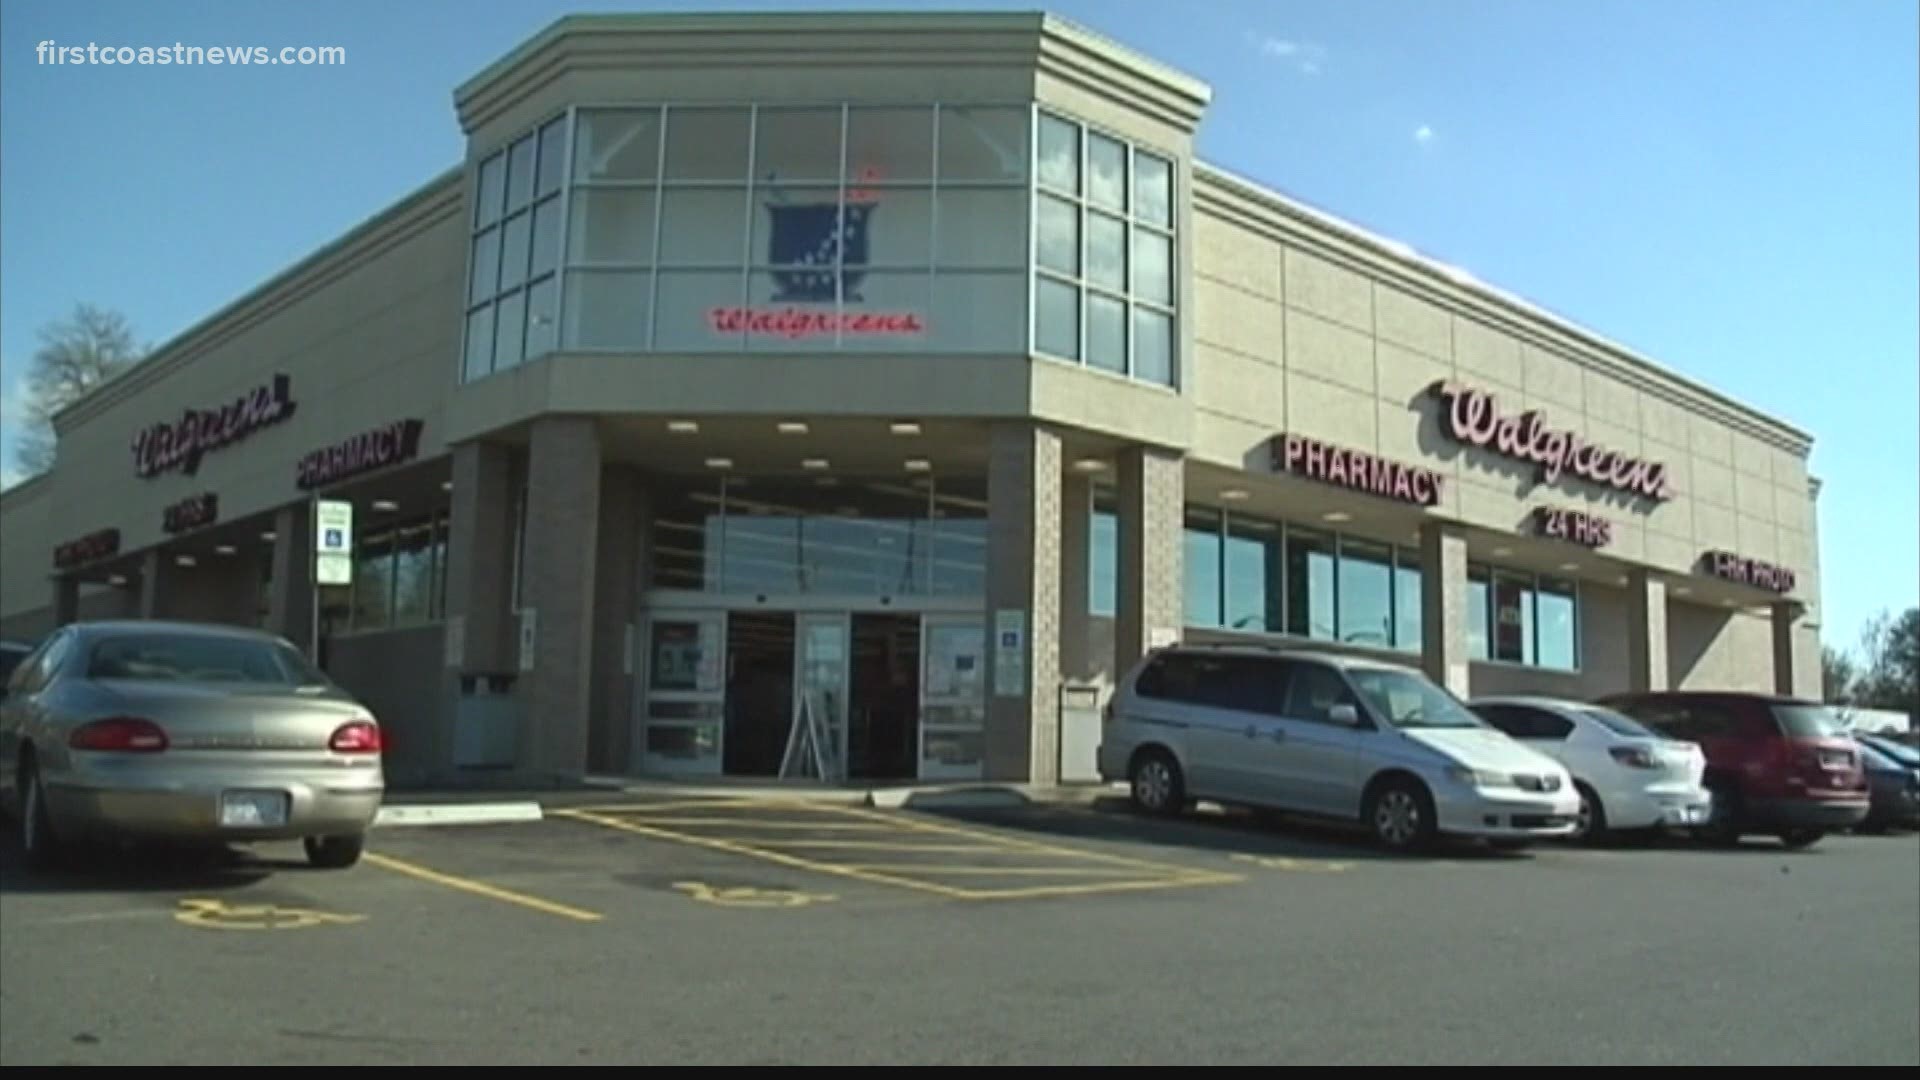 This week, vaccine supply is expected to double for Walgreens across America.